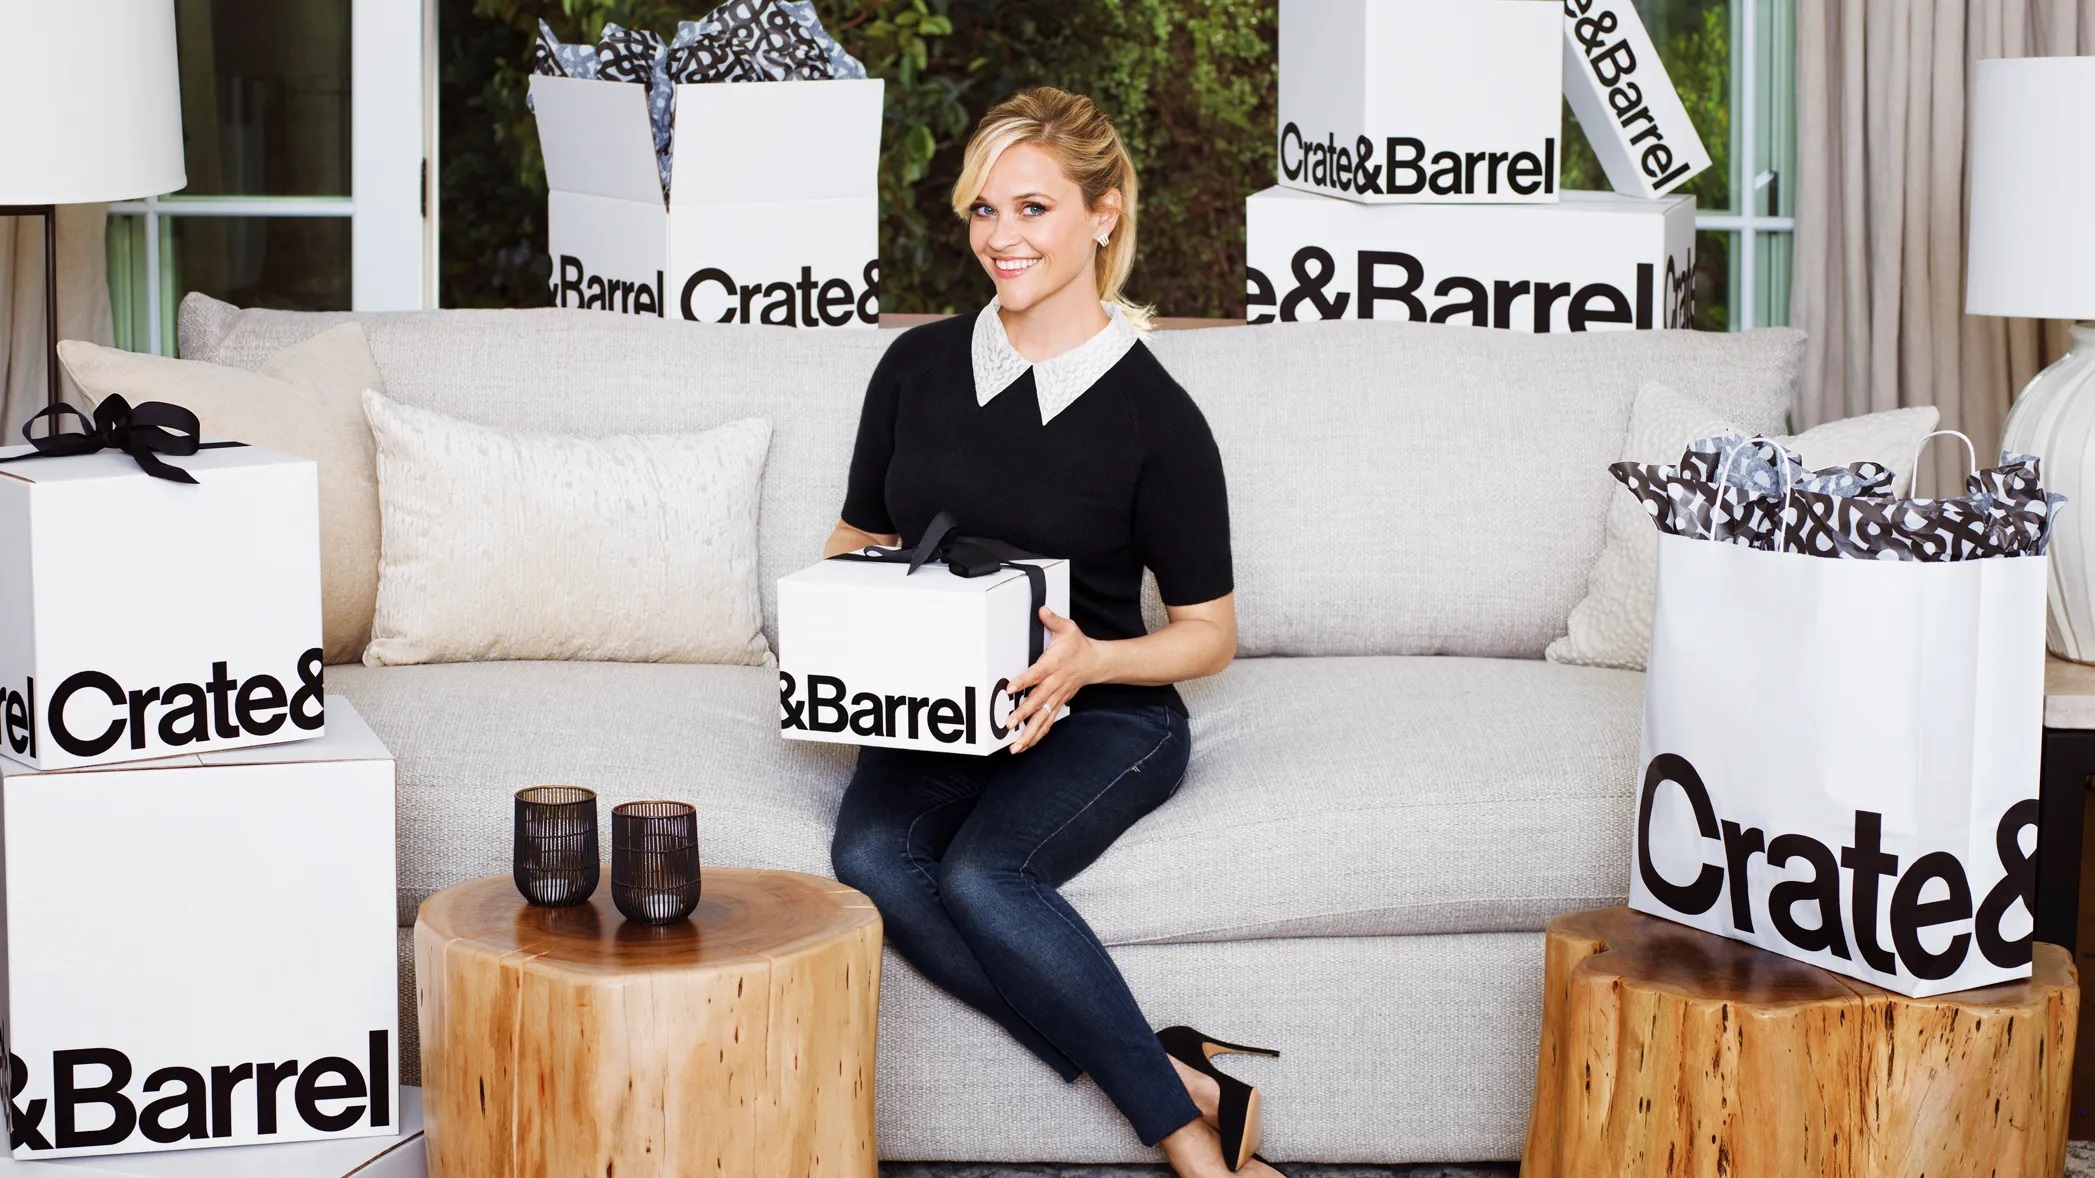 Reese witherspoon sitting on a sofa holding a white box labeled crate and barrel.